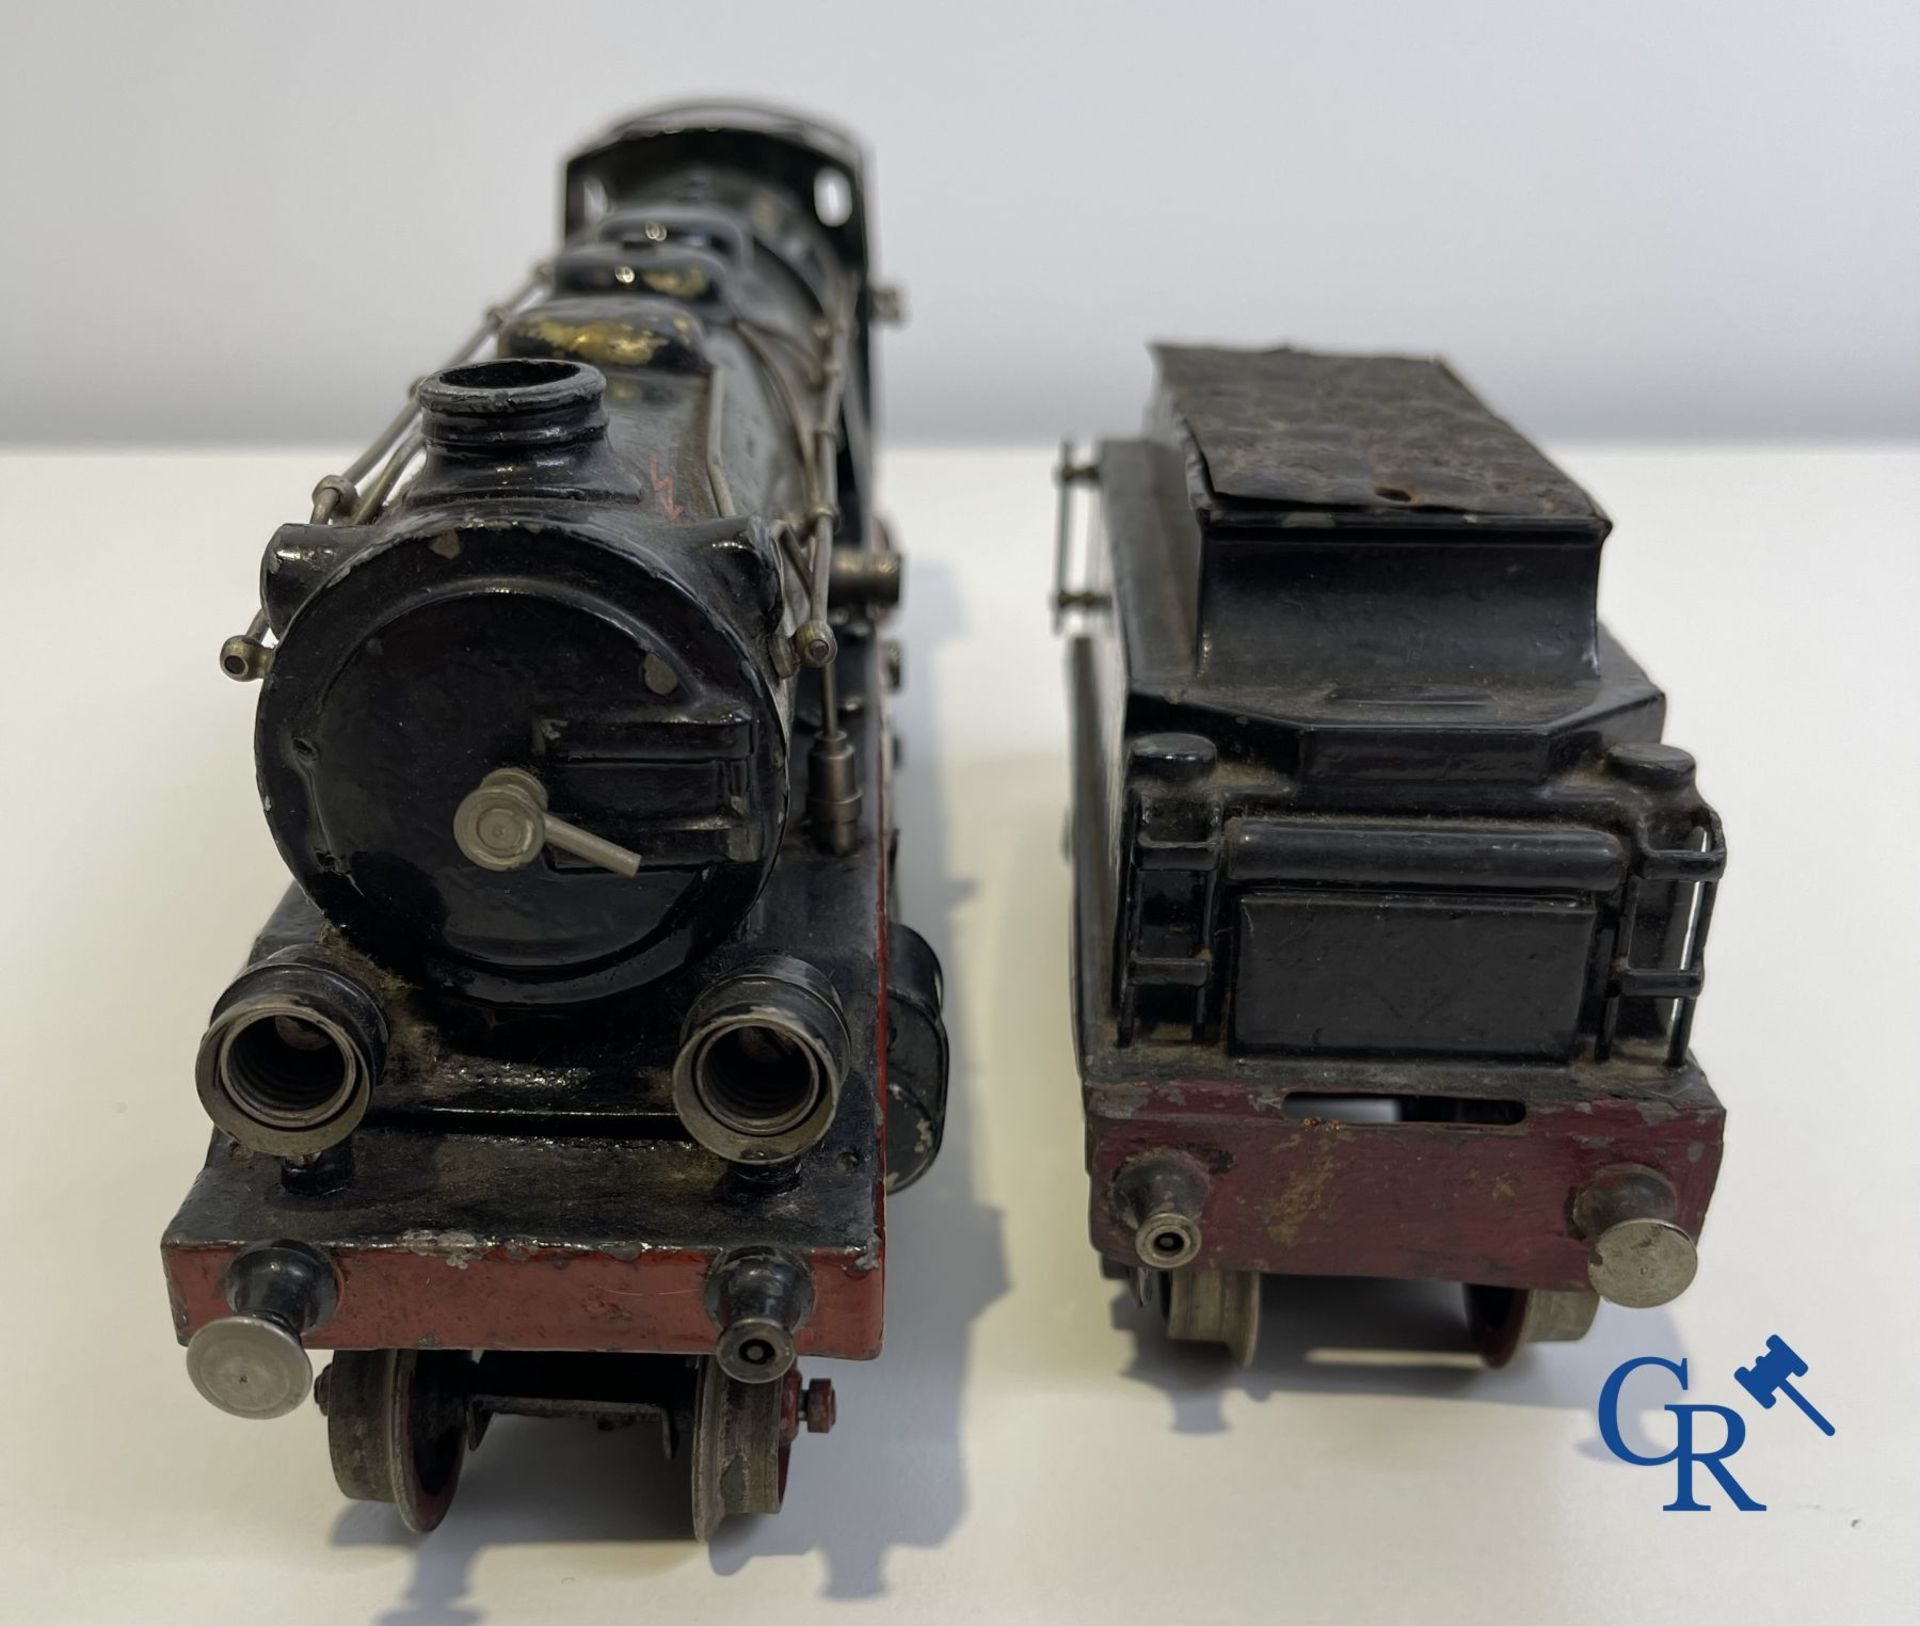 Old toys: Märklin, Locomotive with towing tender and dining car.
About 1930. - Bild 13 aus 32